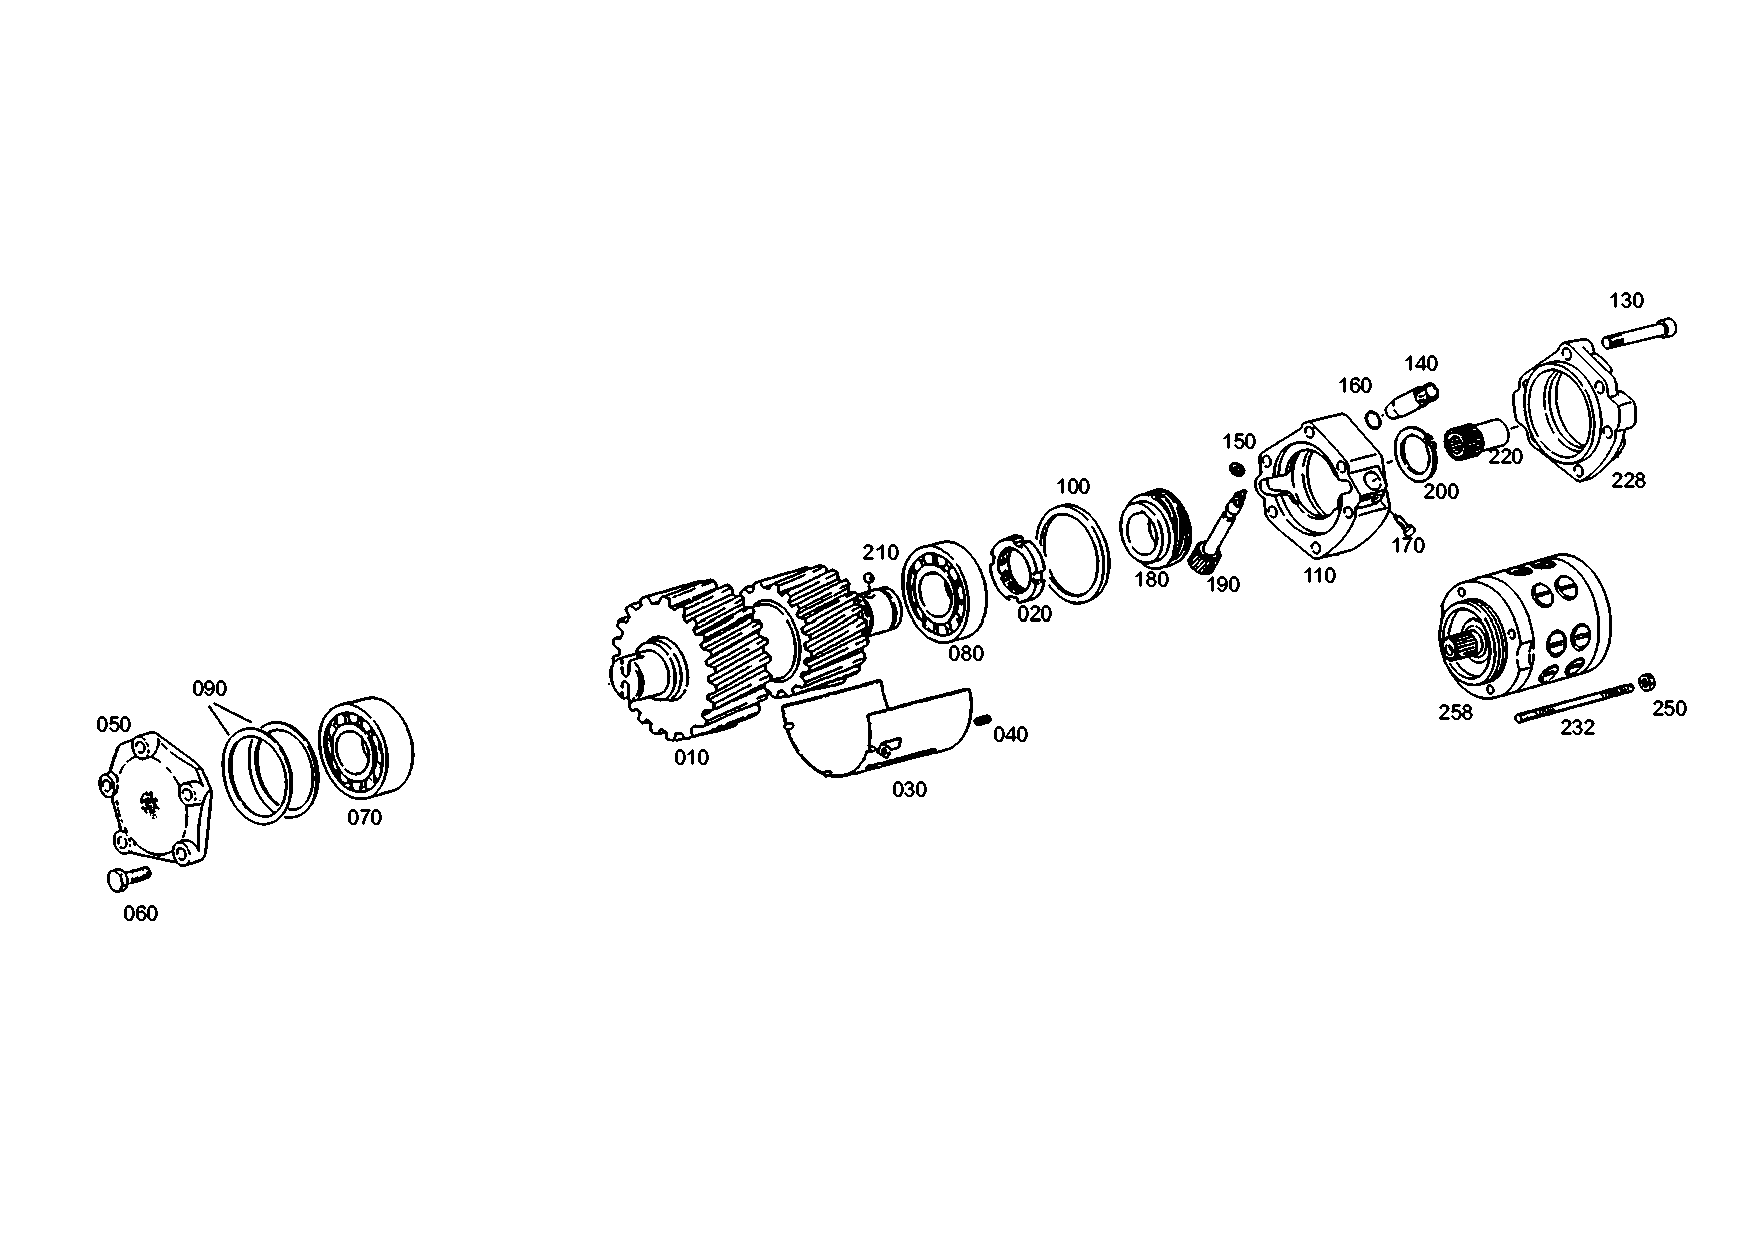 drawing for LUNA EQUIPOS INDUSTRIEALES, S.A. 199118250144 - OUTPUT GEAR (figure 3)